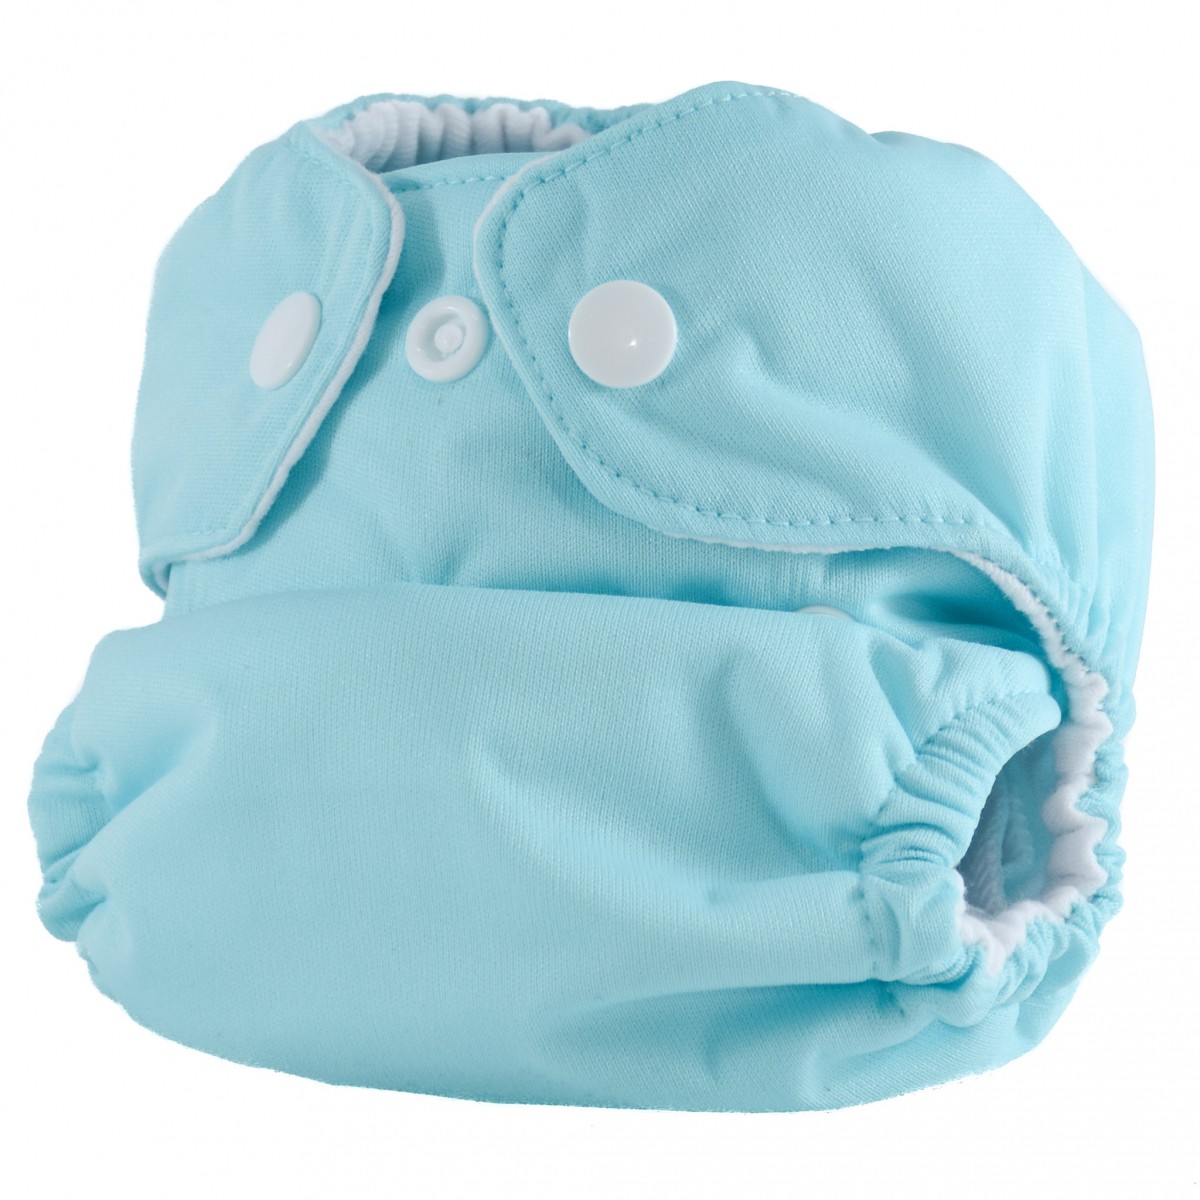 thirsties newborn all in one cloth diaper review